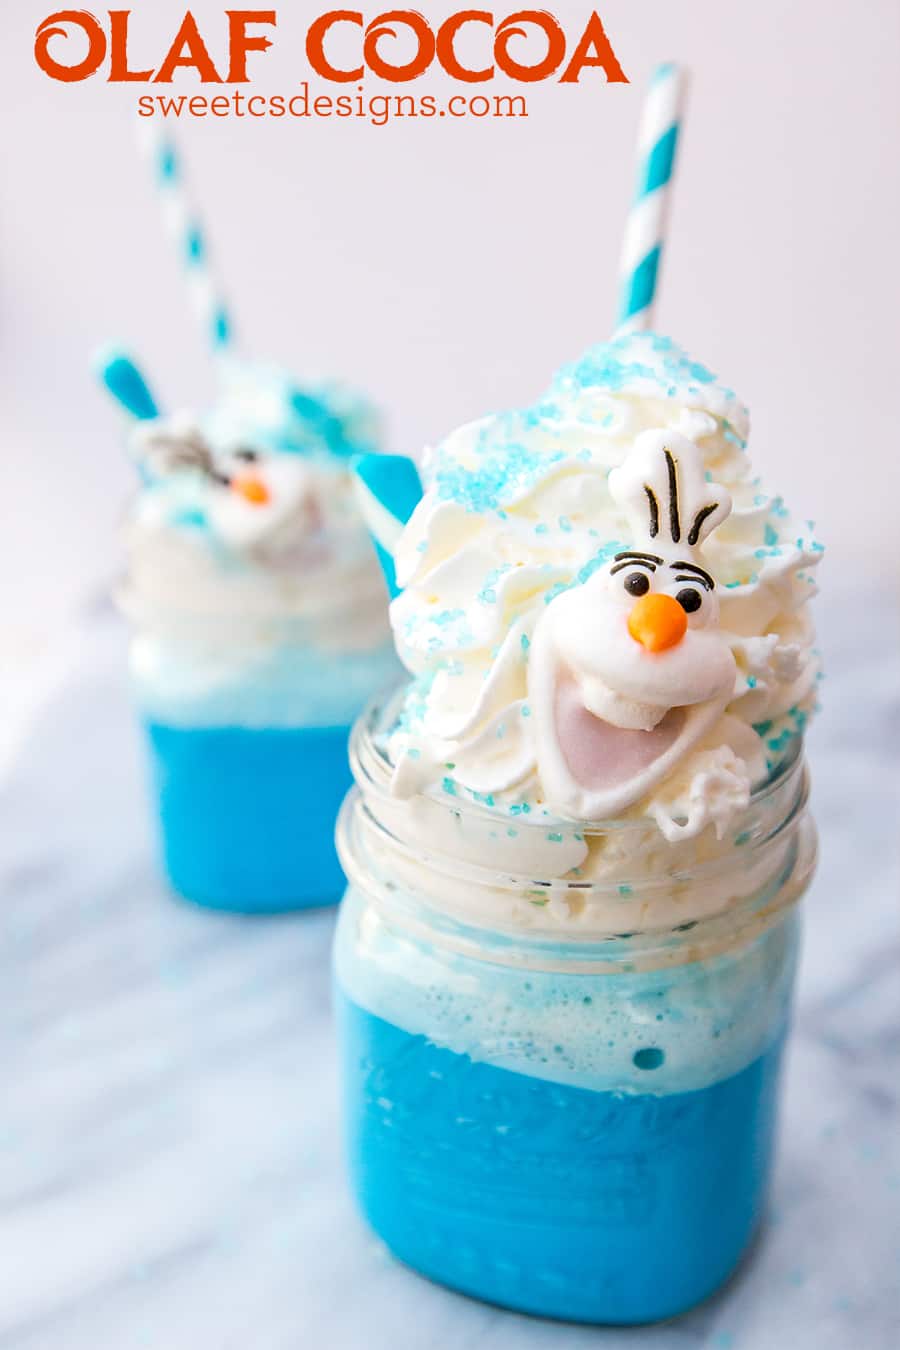 I love this Frozen inspired cocoa- adorned with little Olafs!